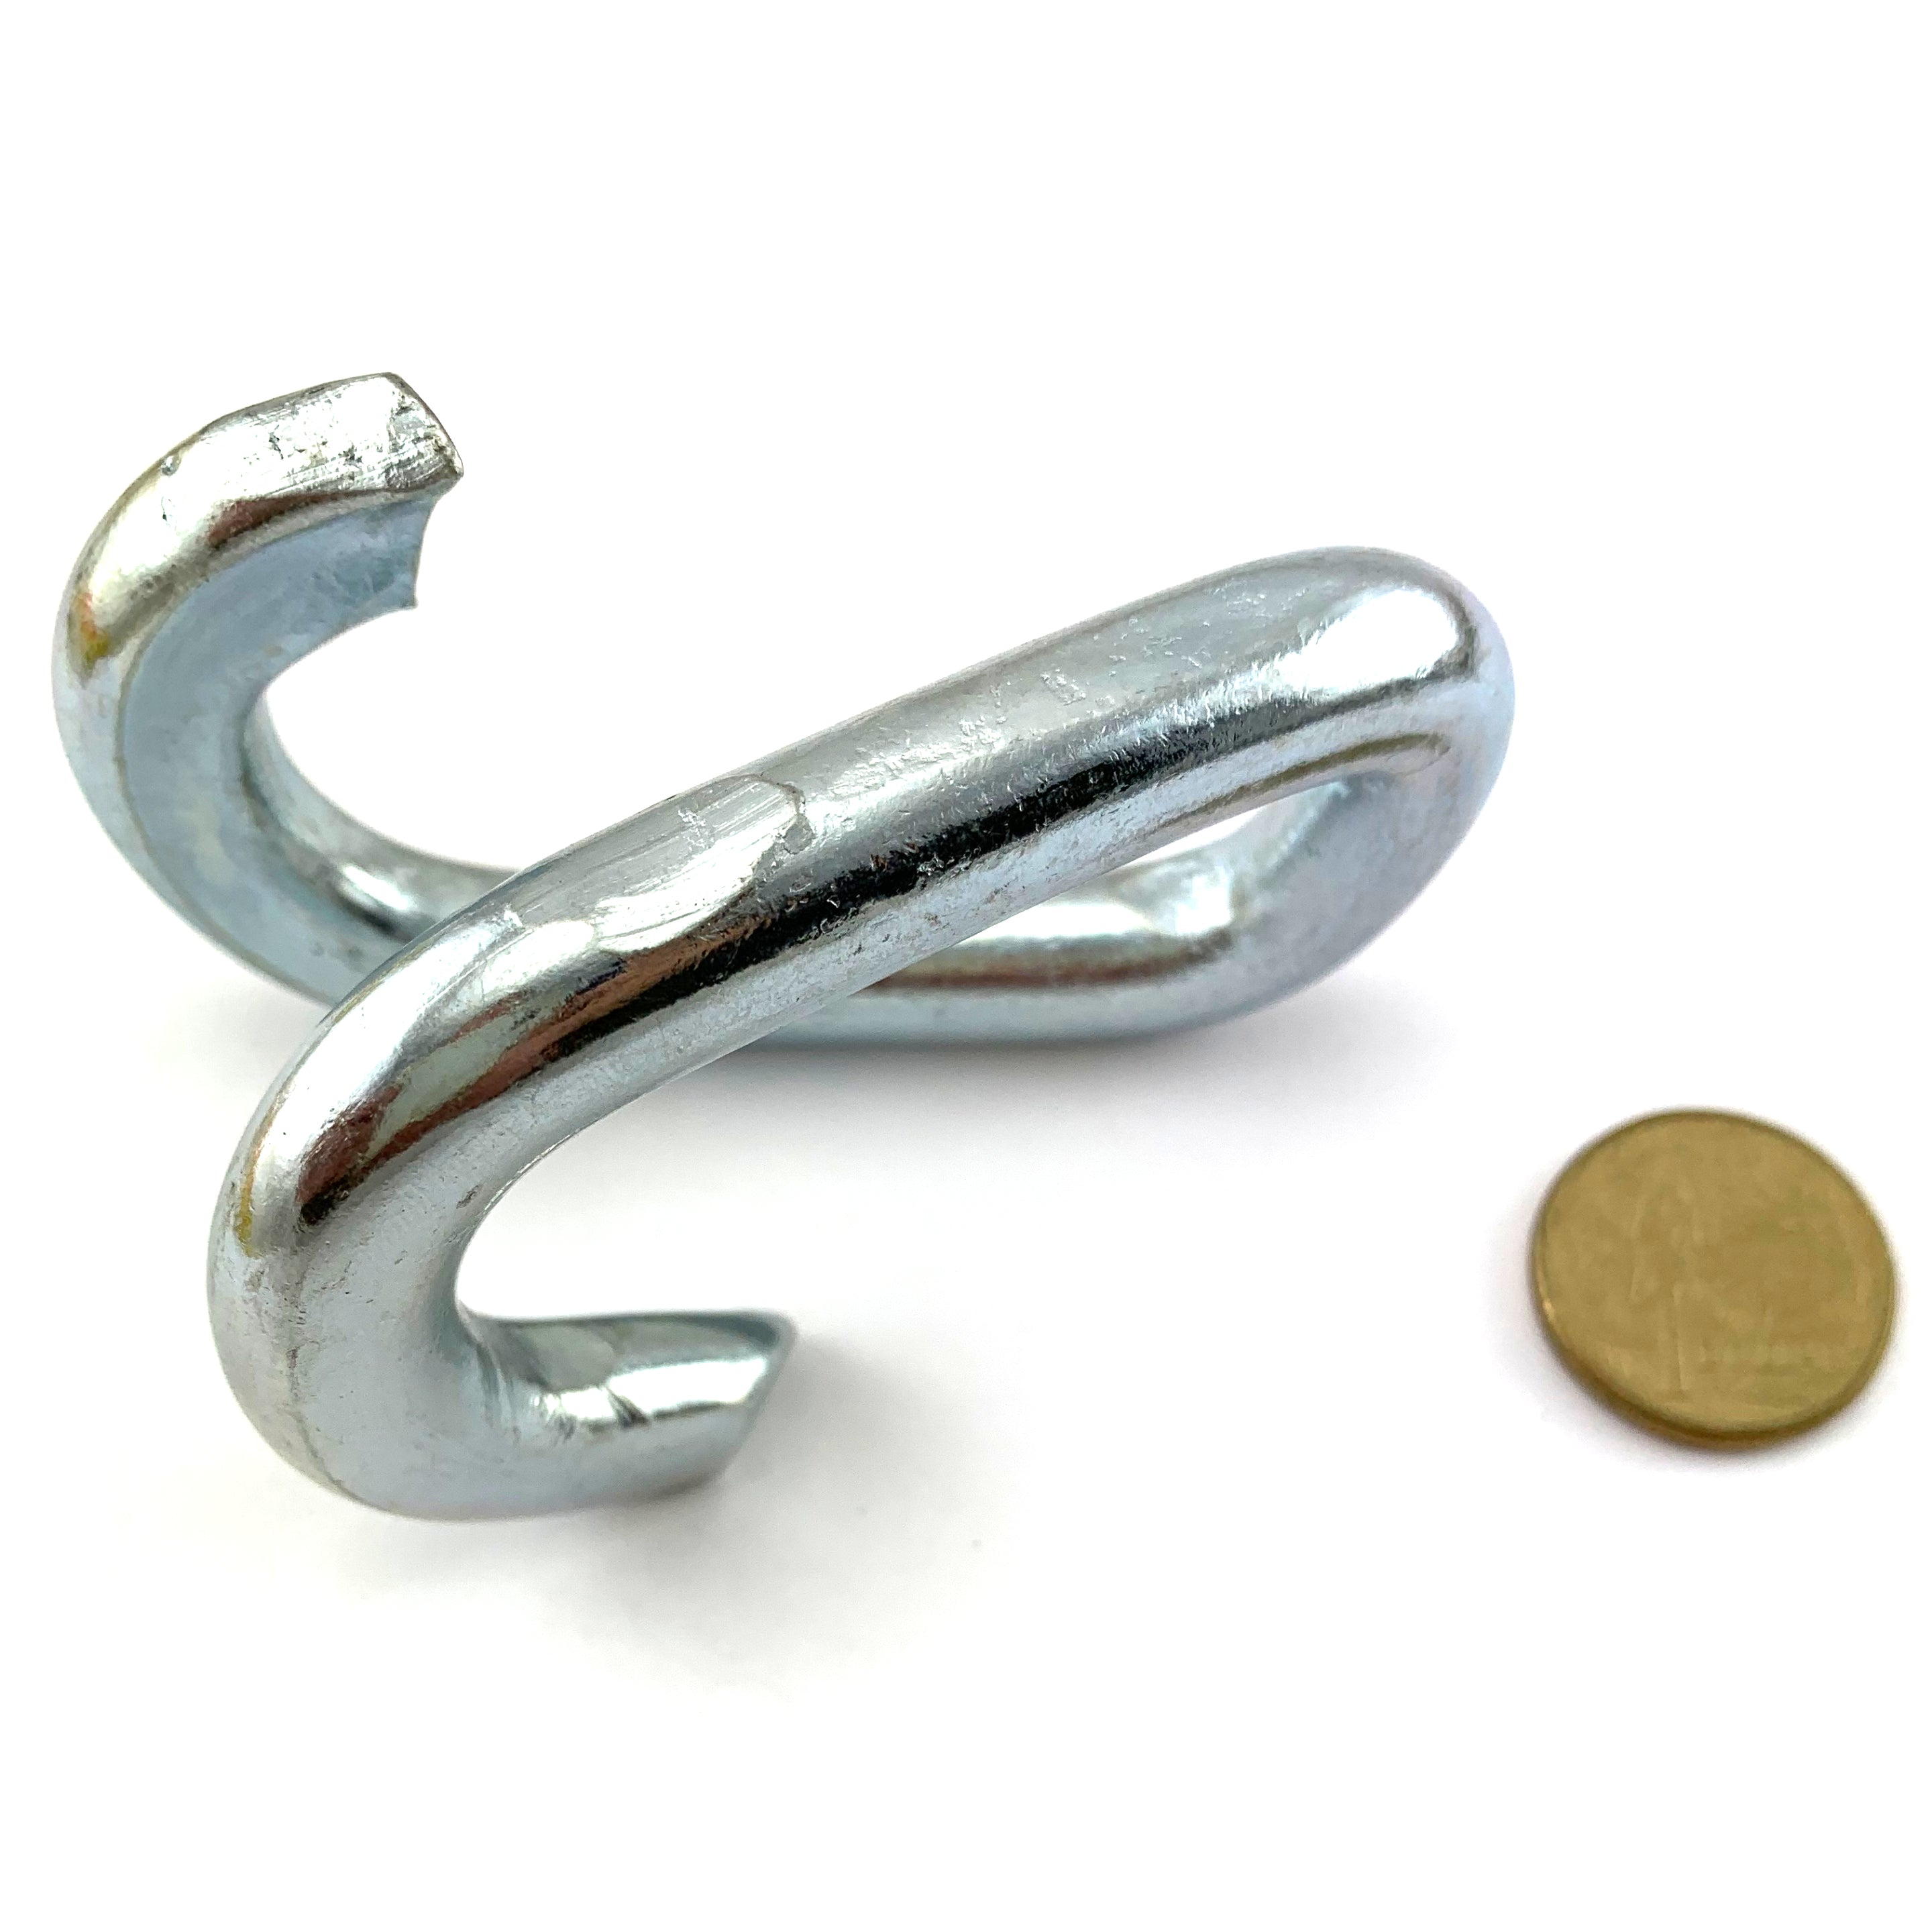 Chain connecting link, in steel with a high gloss zinc finish, size 12mm. Australia wide.